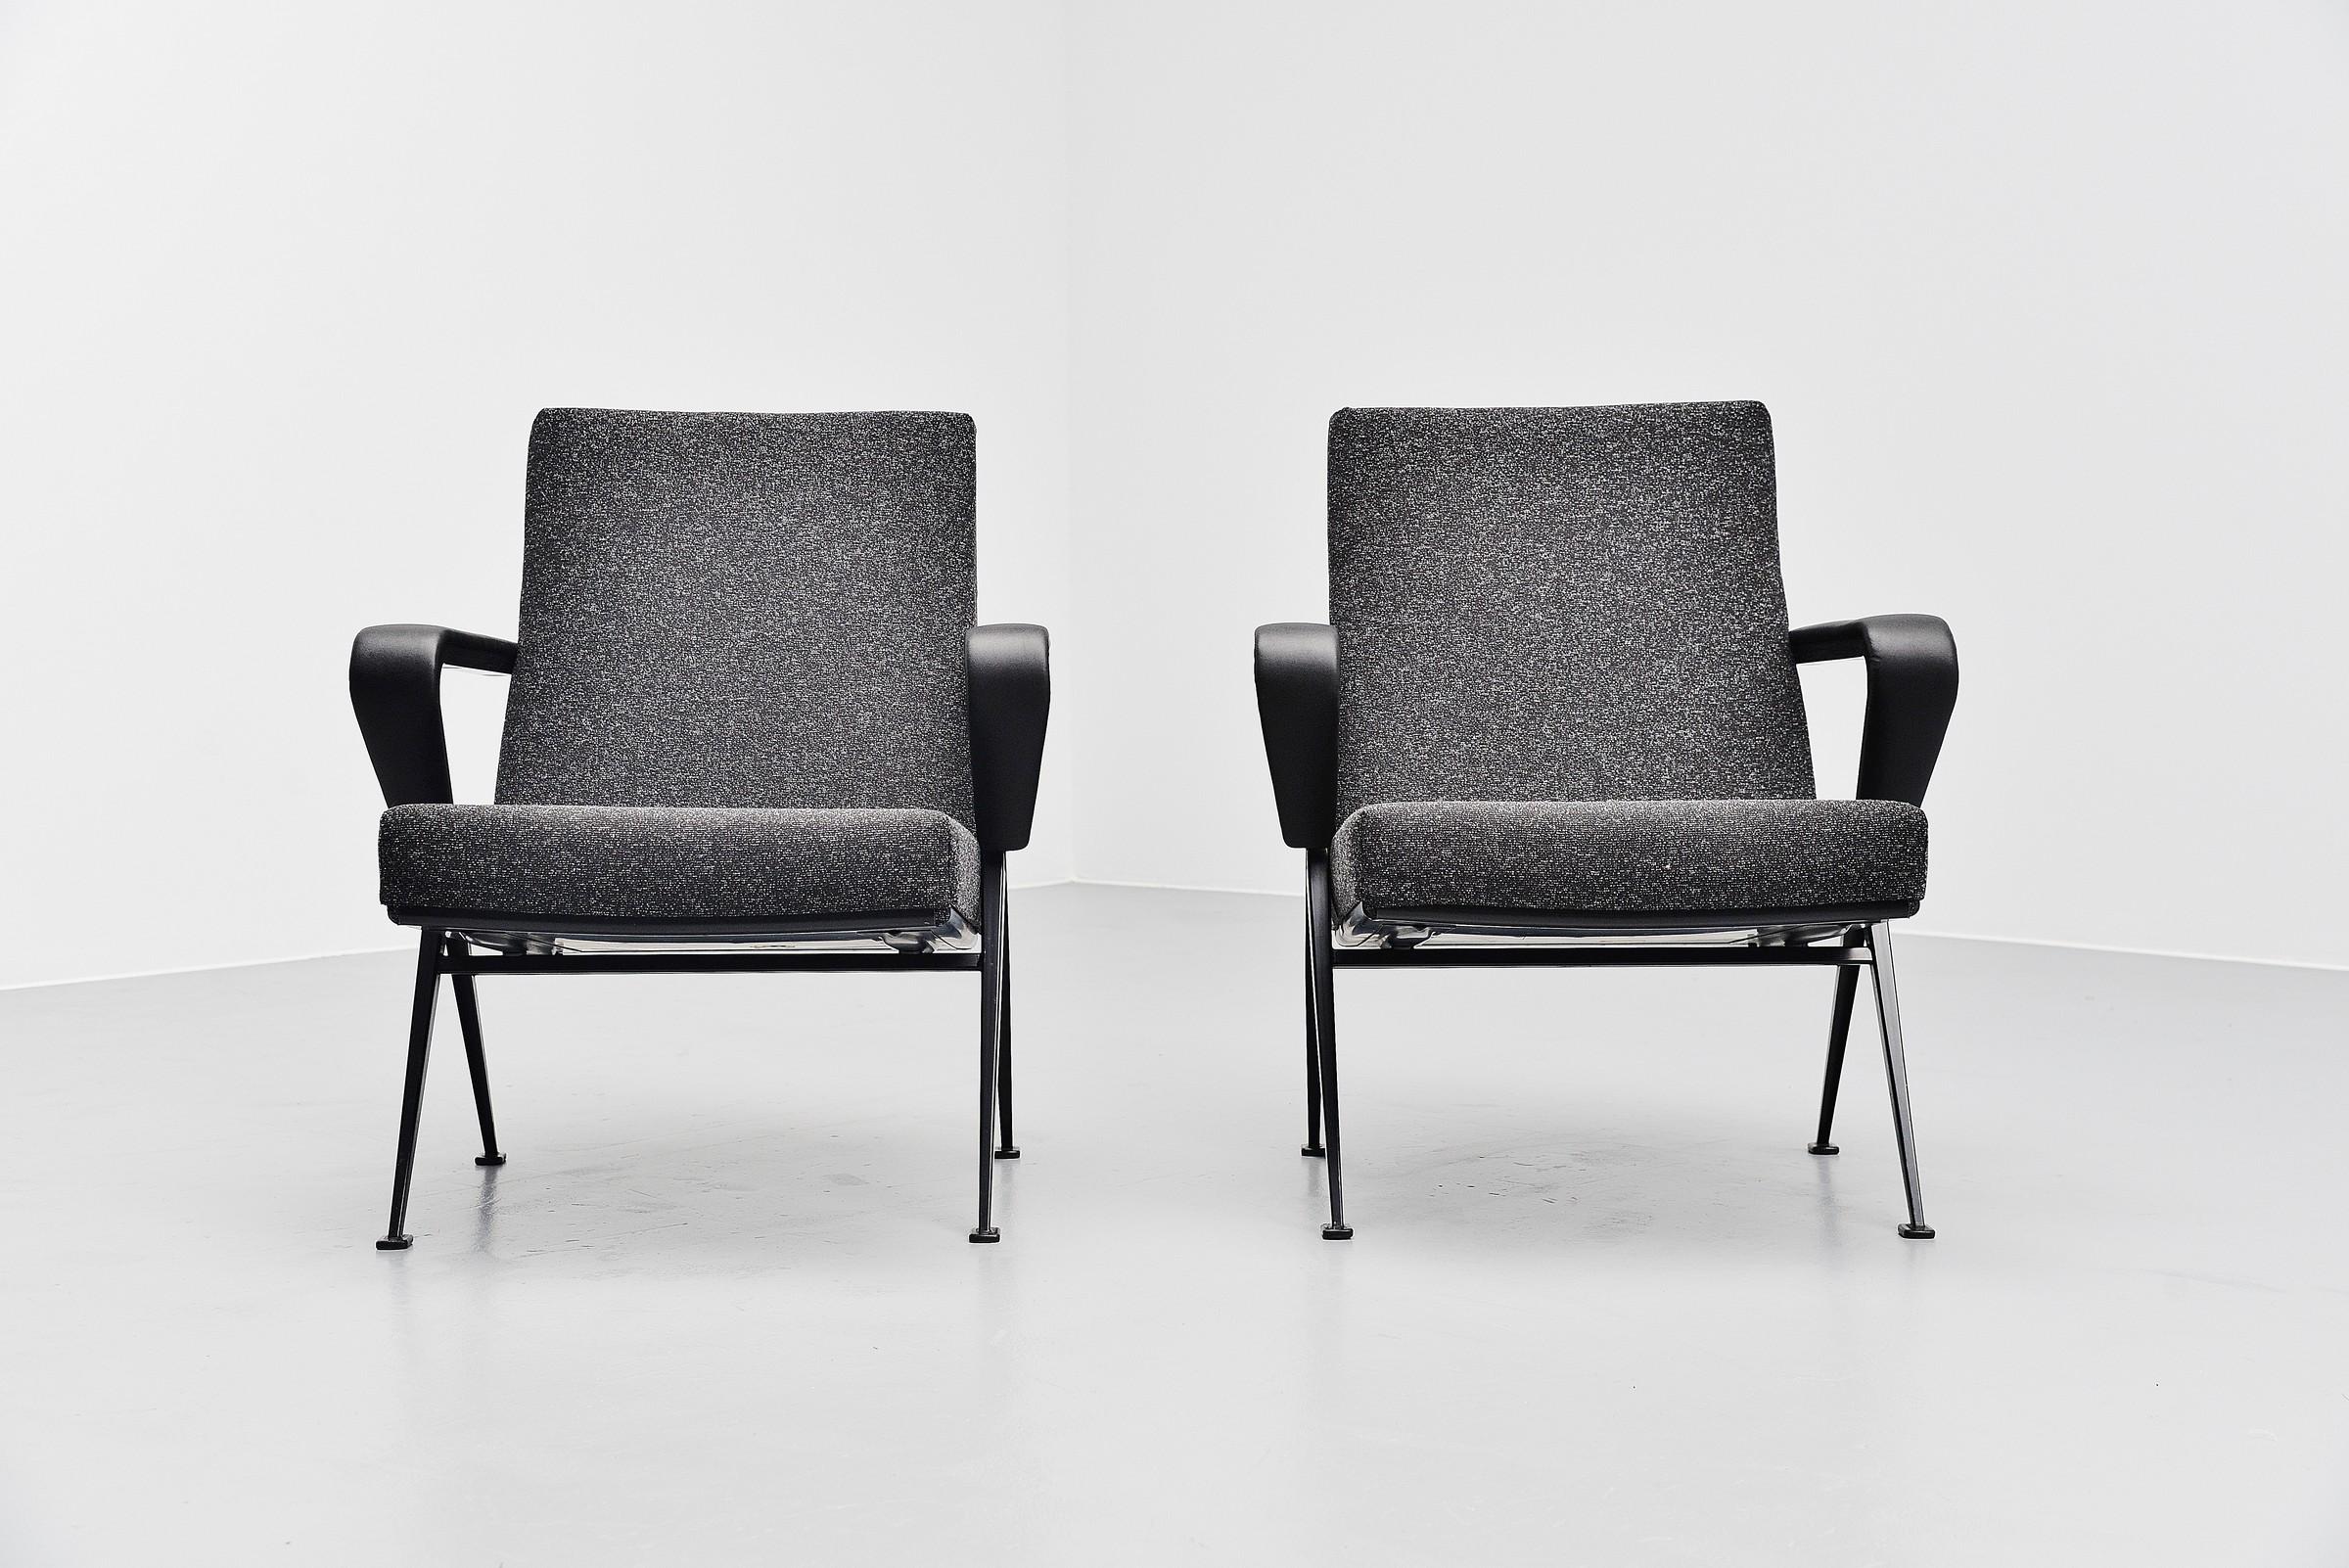 Friso Kramer Repose chairs Ahrend de Cirkel, 1959 In Good Condition For Sale In Roosendaal, Noord Brabant